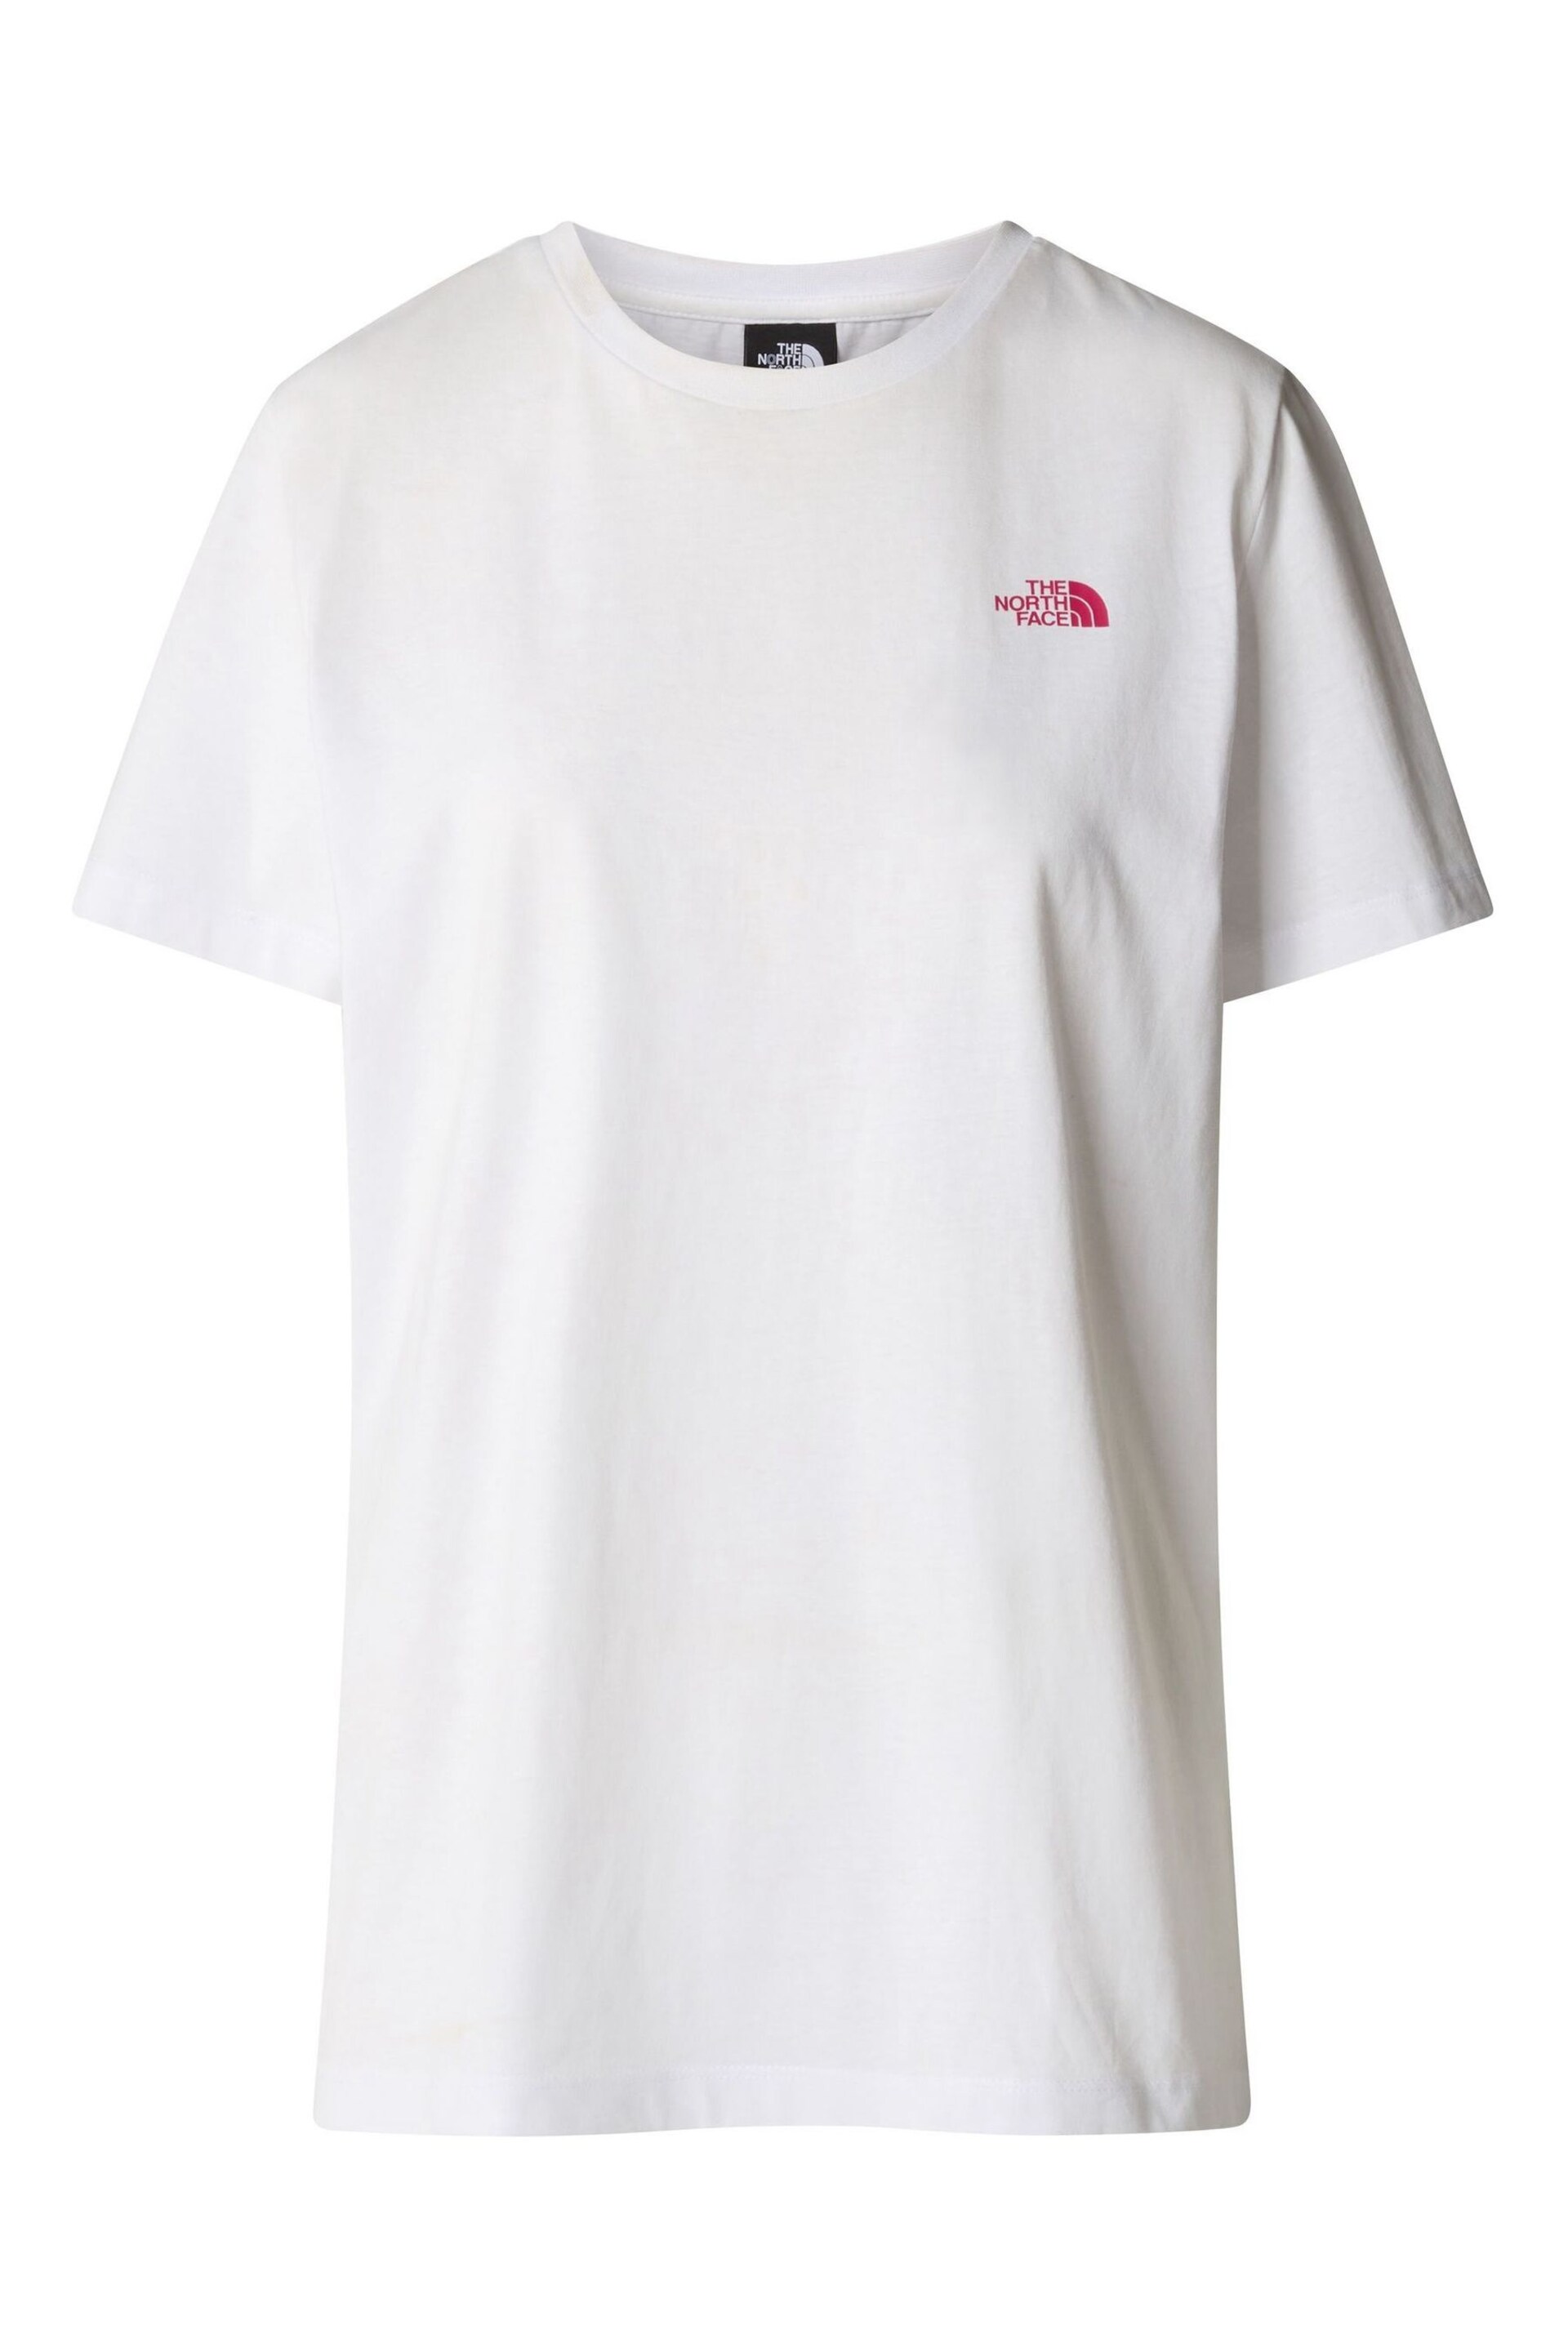 The North Face White Womens Festival Graphic T-Shirt - Image 1 of 2